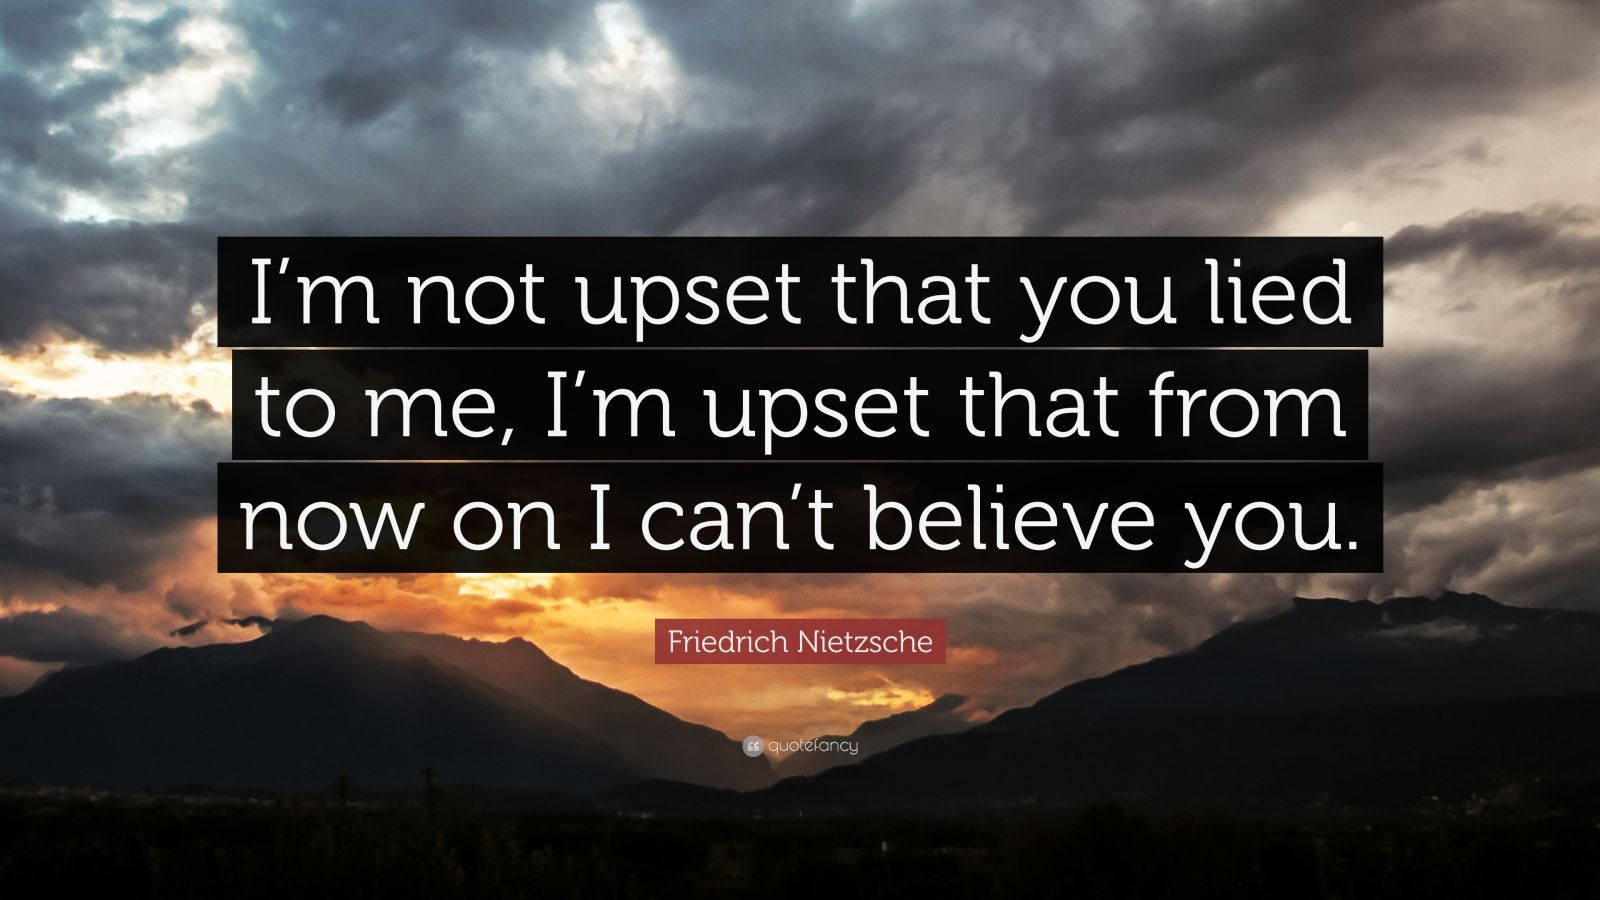 Friedrich Nietzsche Quote: “I’m not upset that you lied to me, I’m